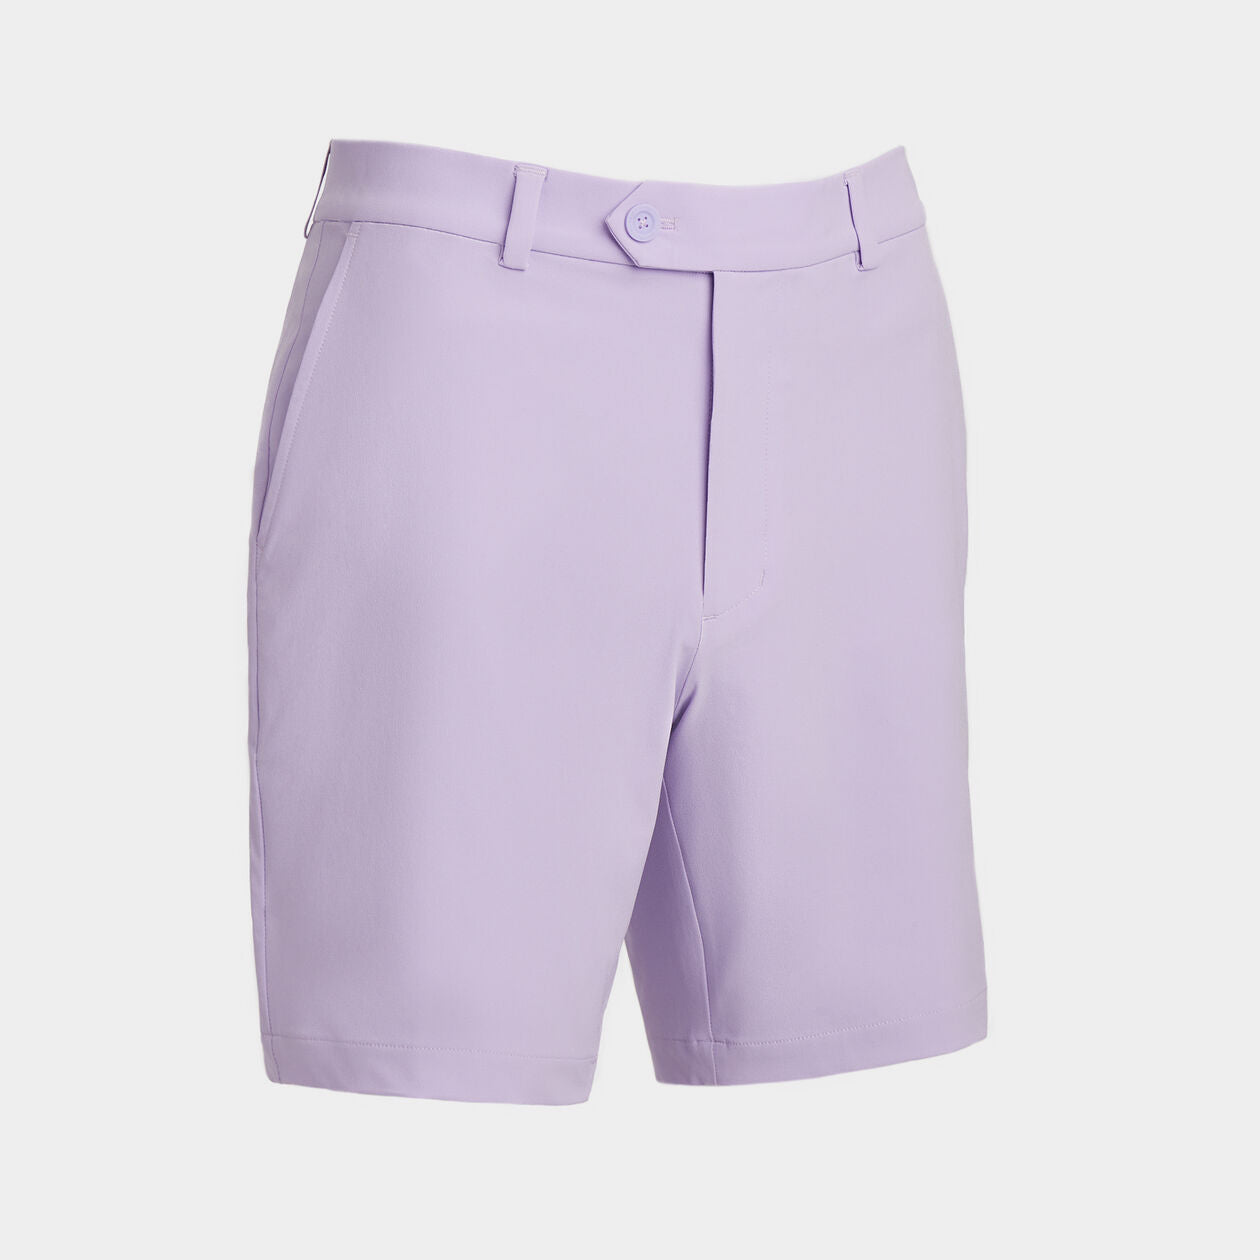 Maverick 4-way stretch short from G/Fore